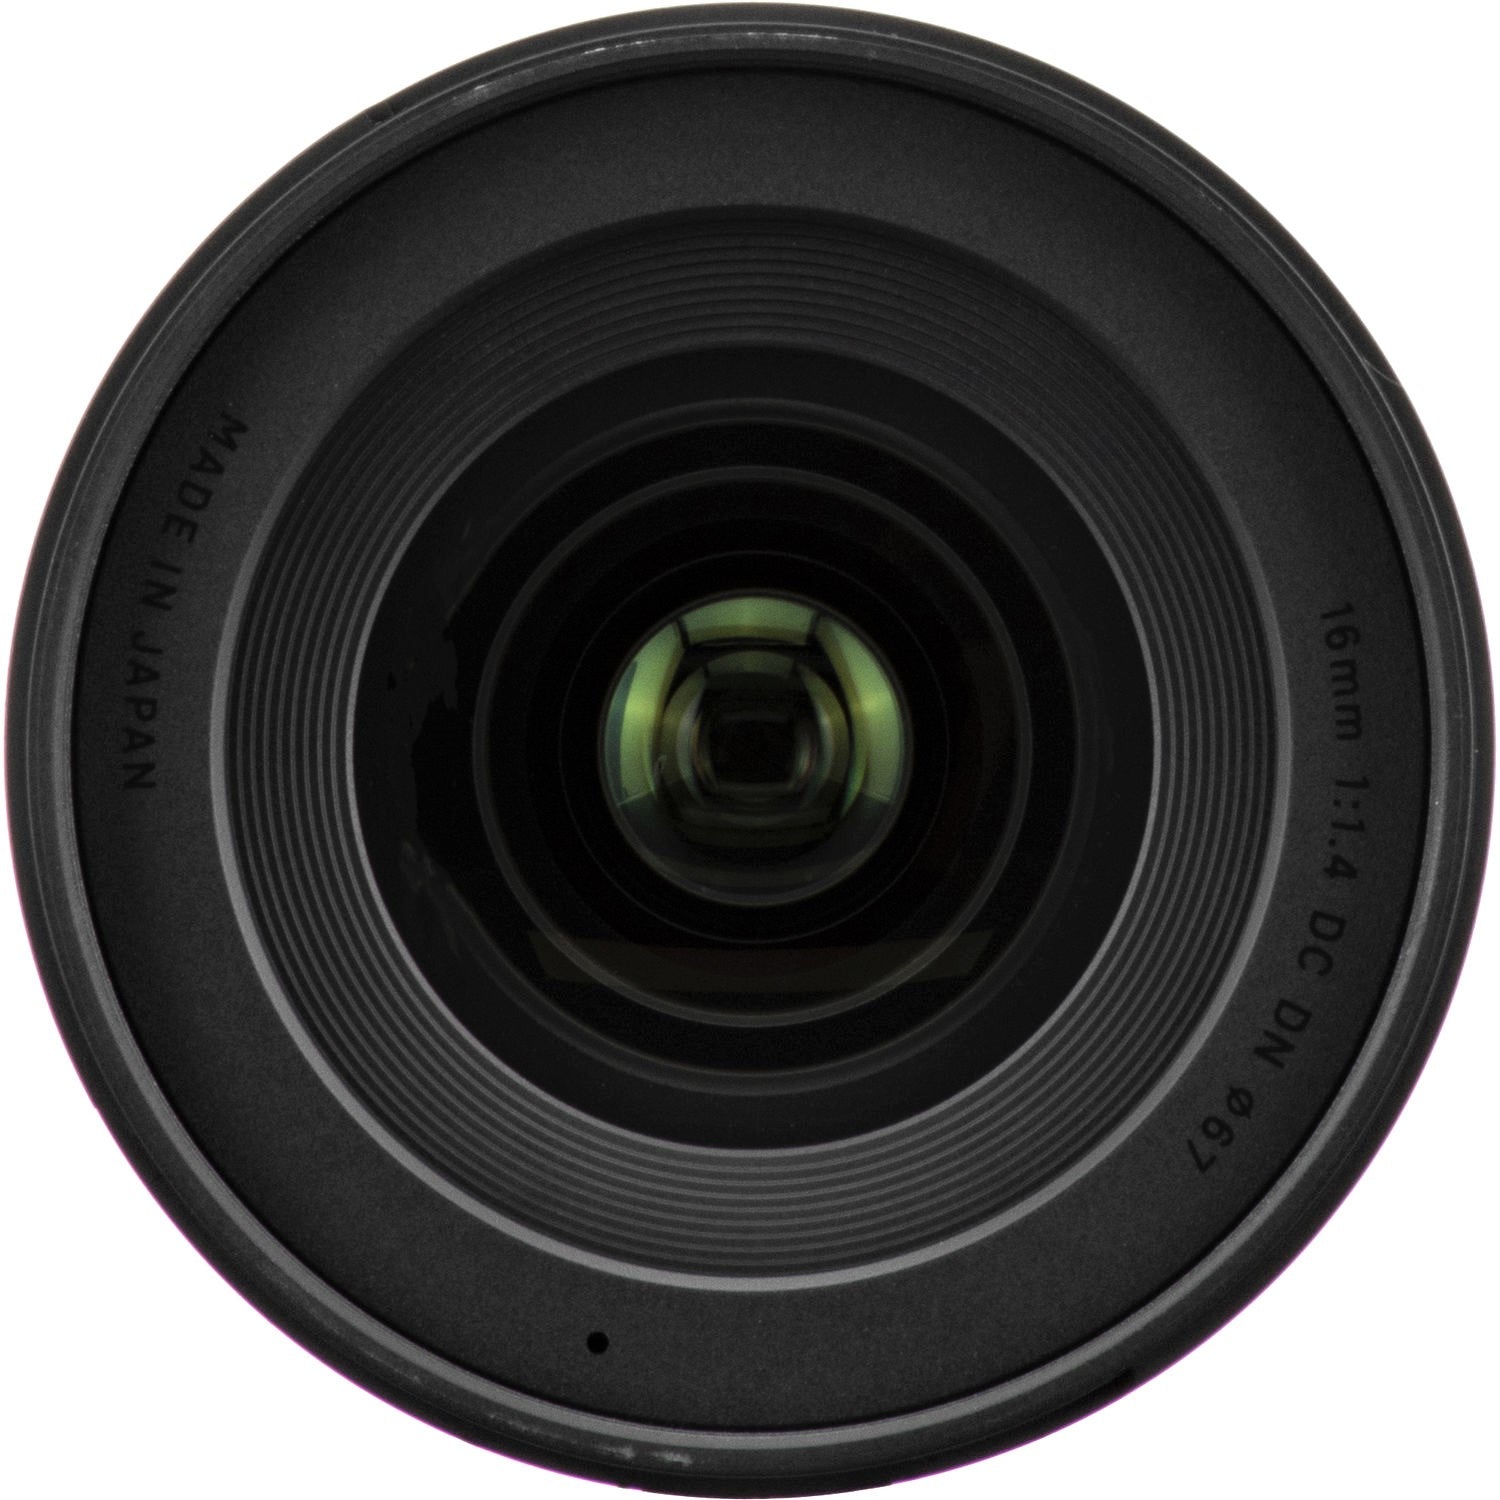 Sigma 16mm f/1.4 DC DN Contemporary Lens for Sony E (402965) - Front View